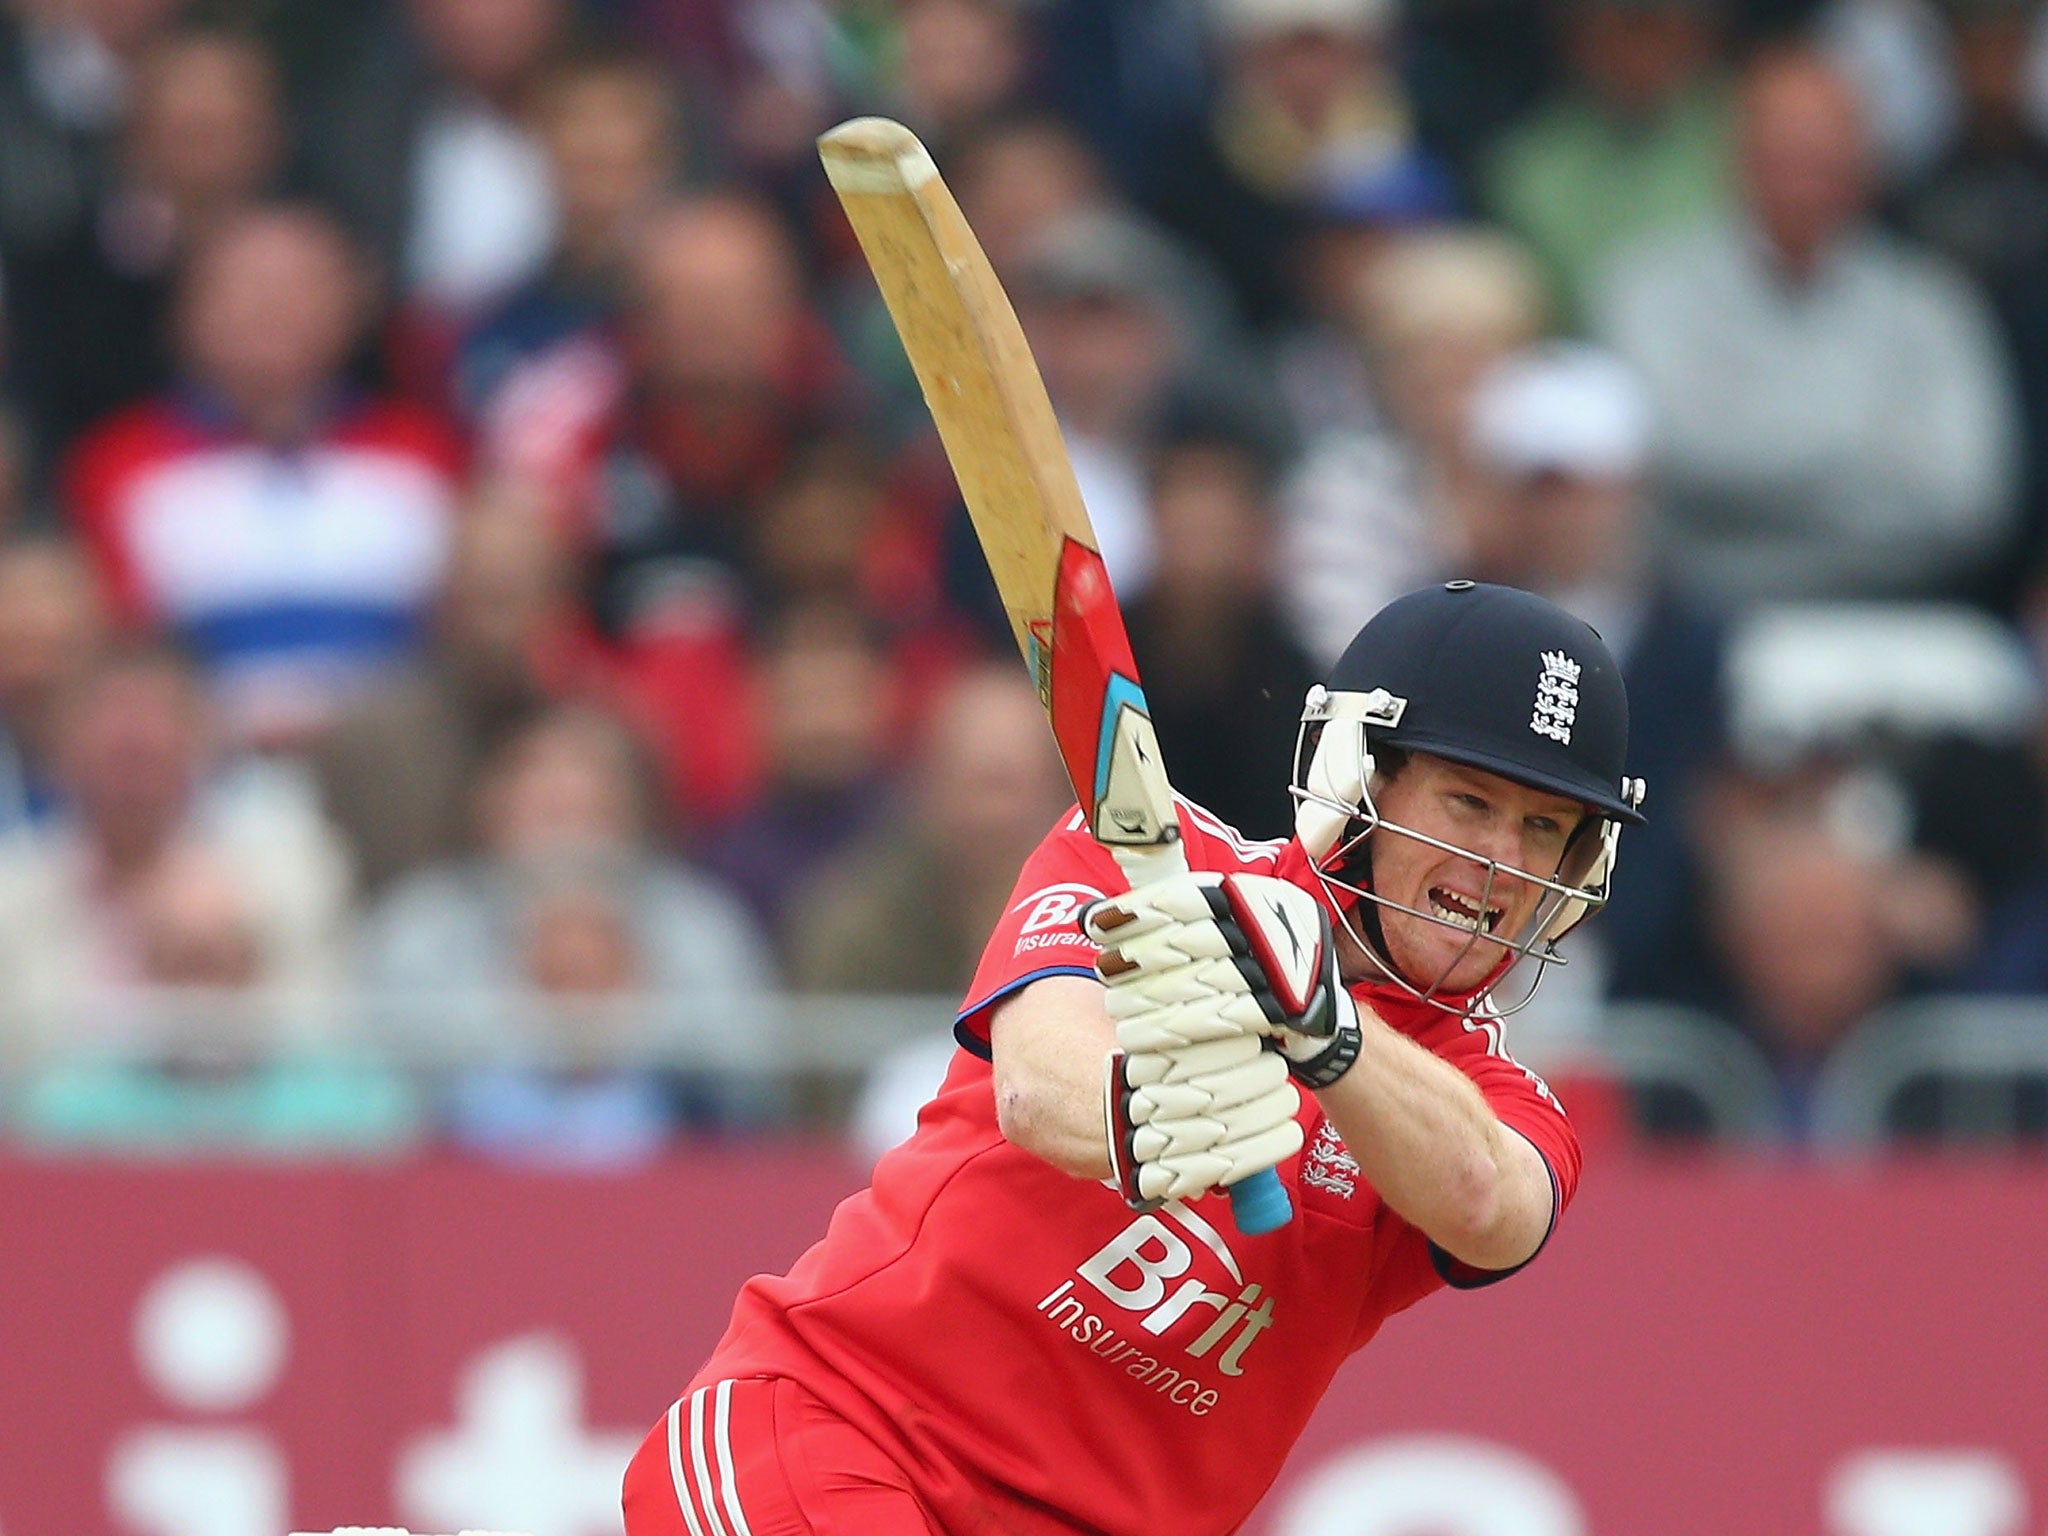 Dublin-born Eoin Morgan switched allegiance to England